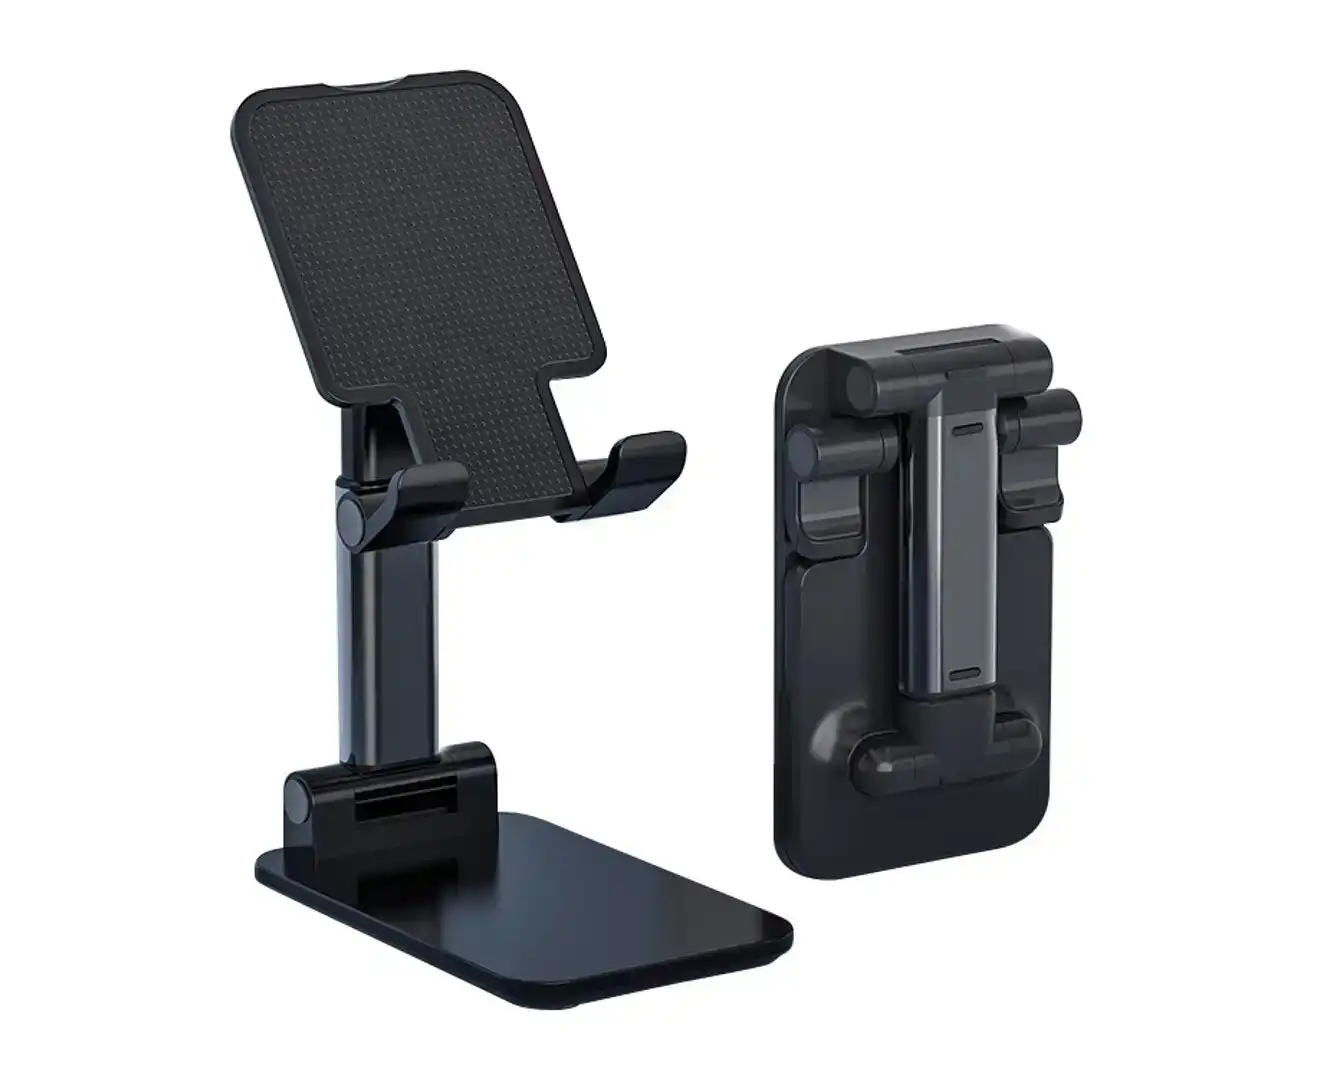 Orotec Universal Folding Retractable Phone Holder Desktop Stand for Smartphones and Tablets, Black